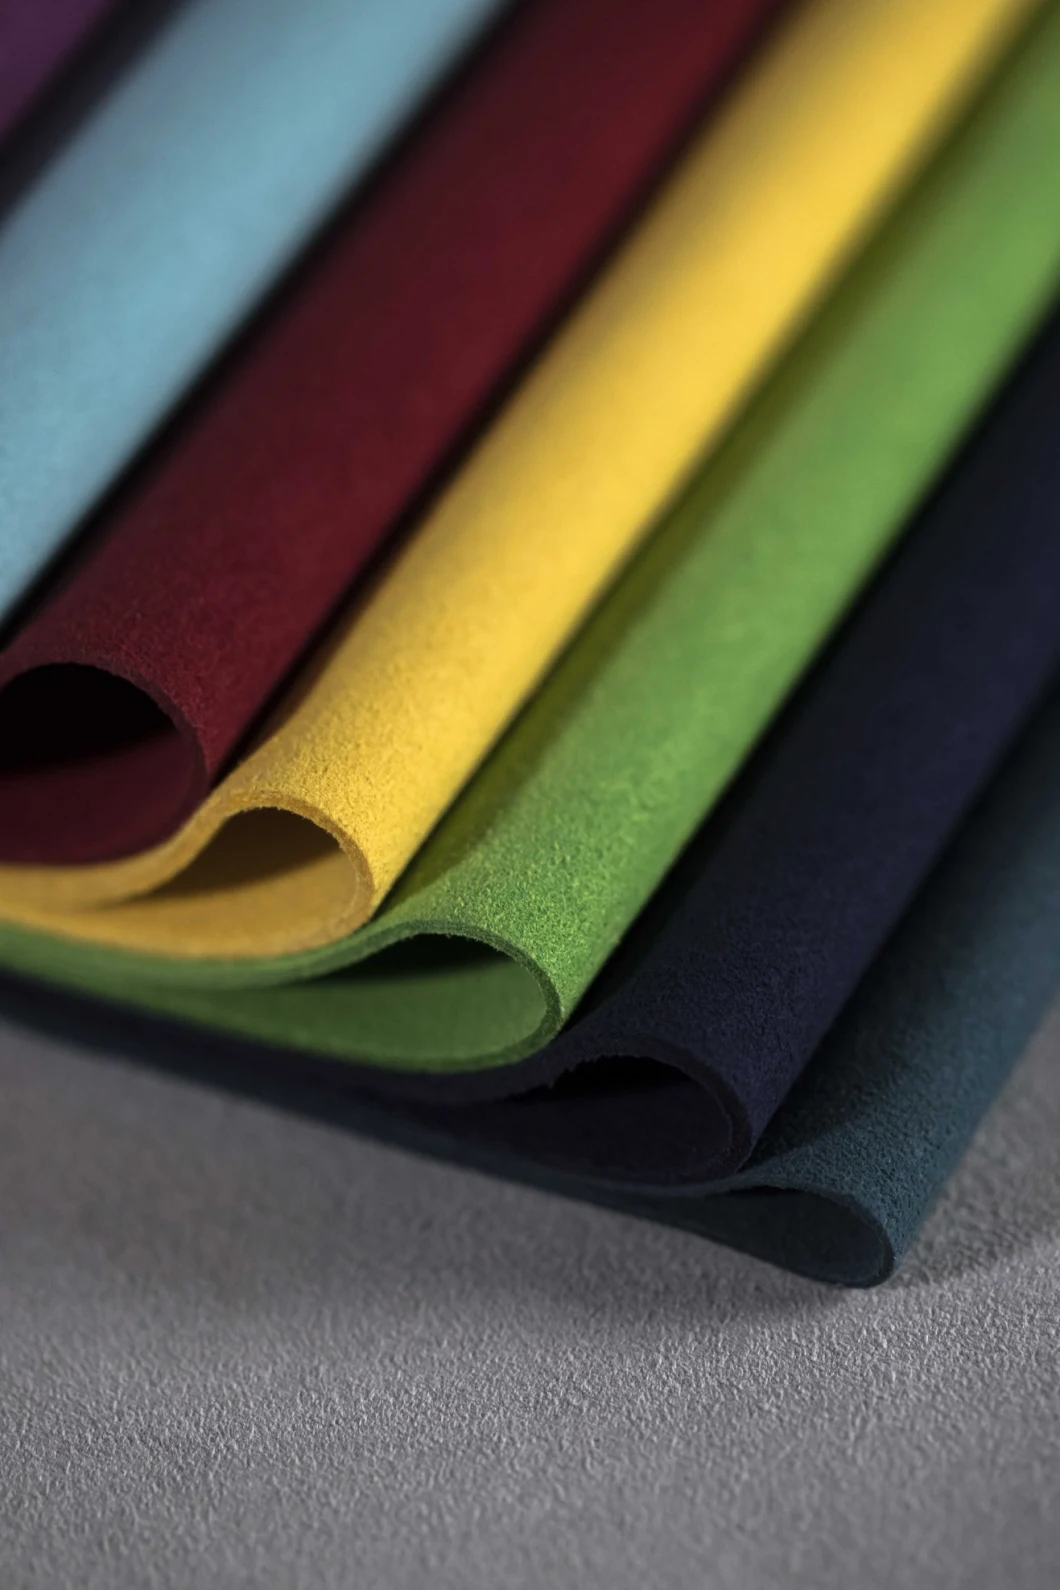 PU Nylon Fabric Suede Nonwoven High Quality Microfiber for Fashion Lady Handbags and Leather Goods